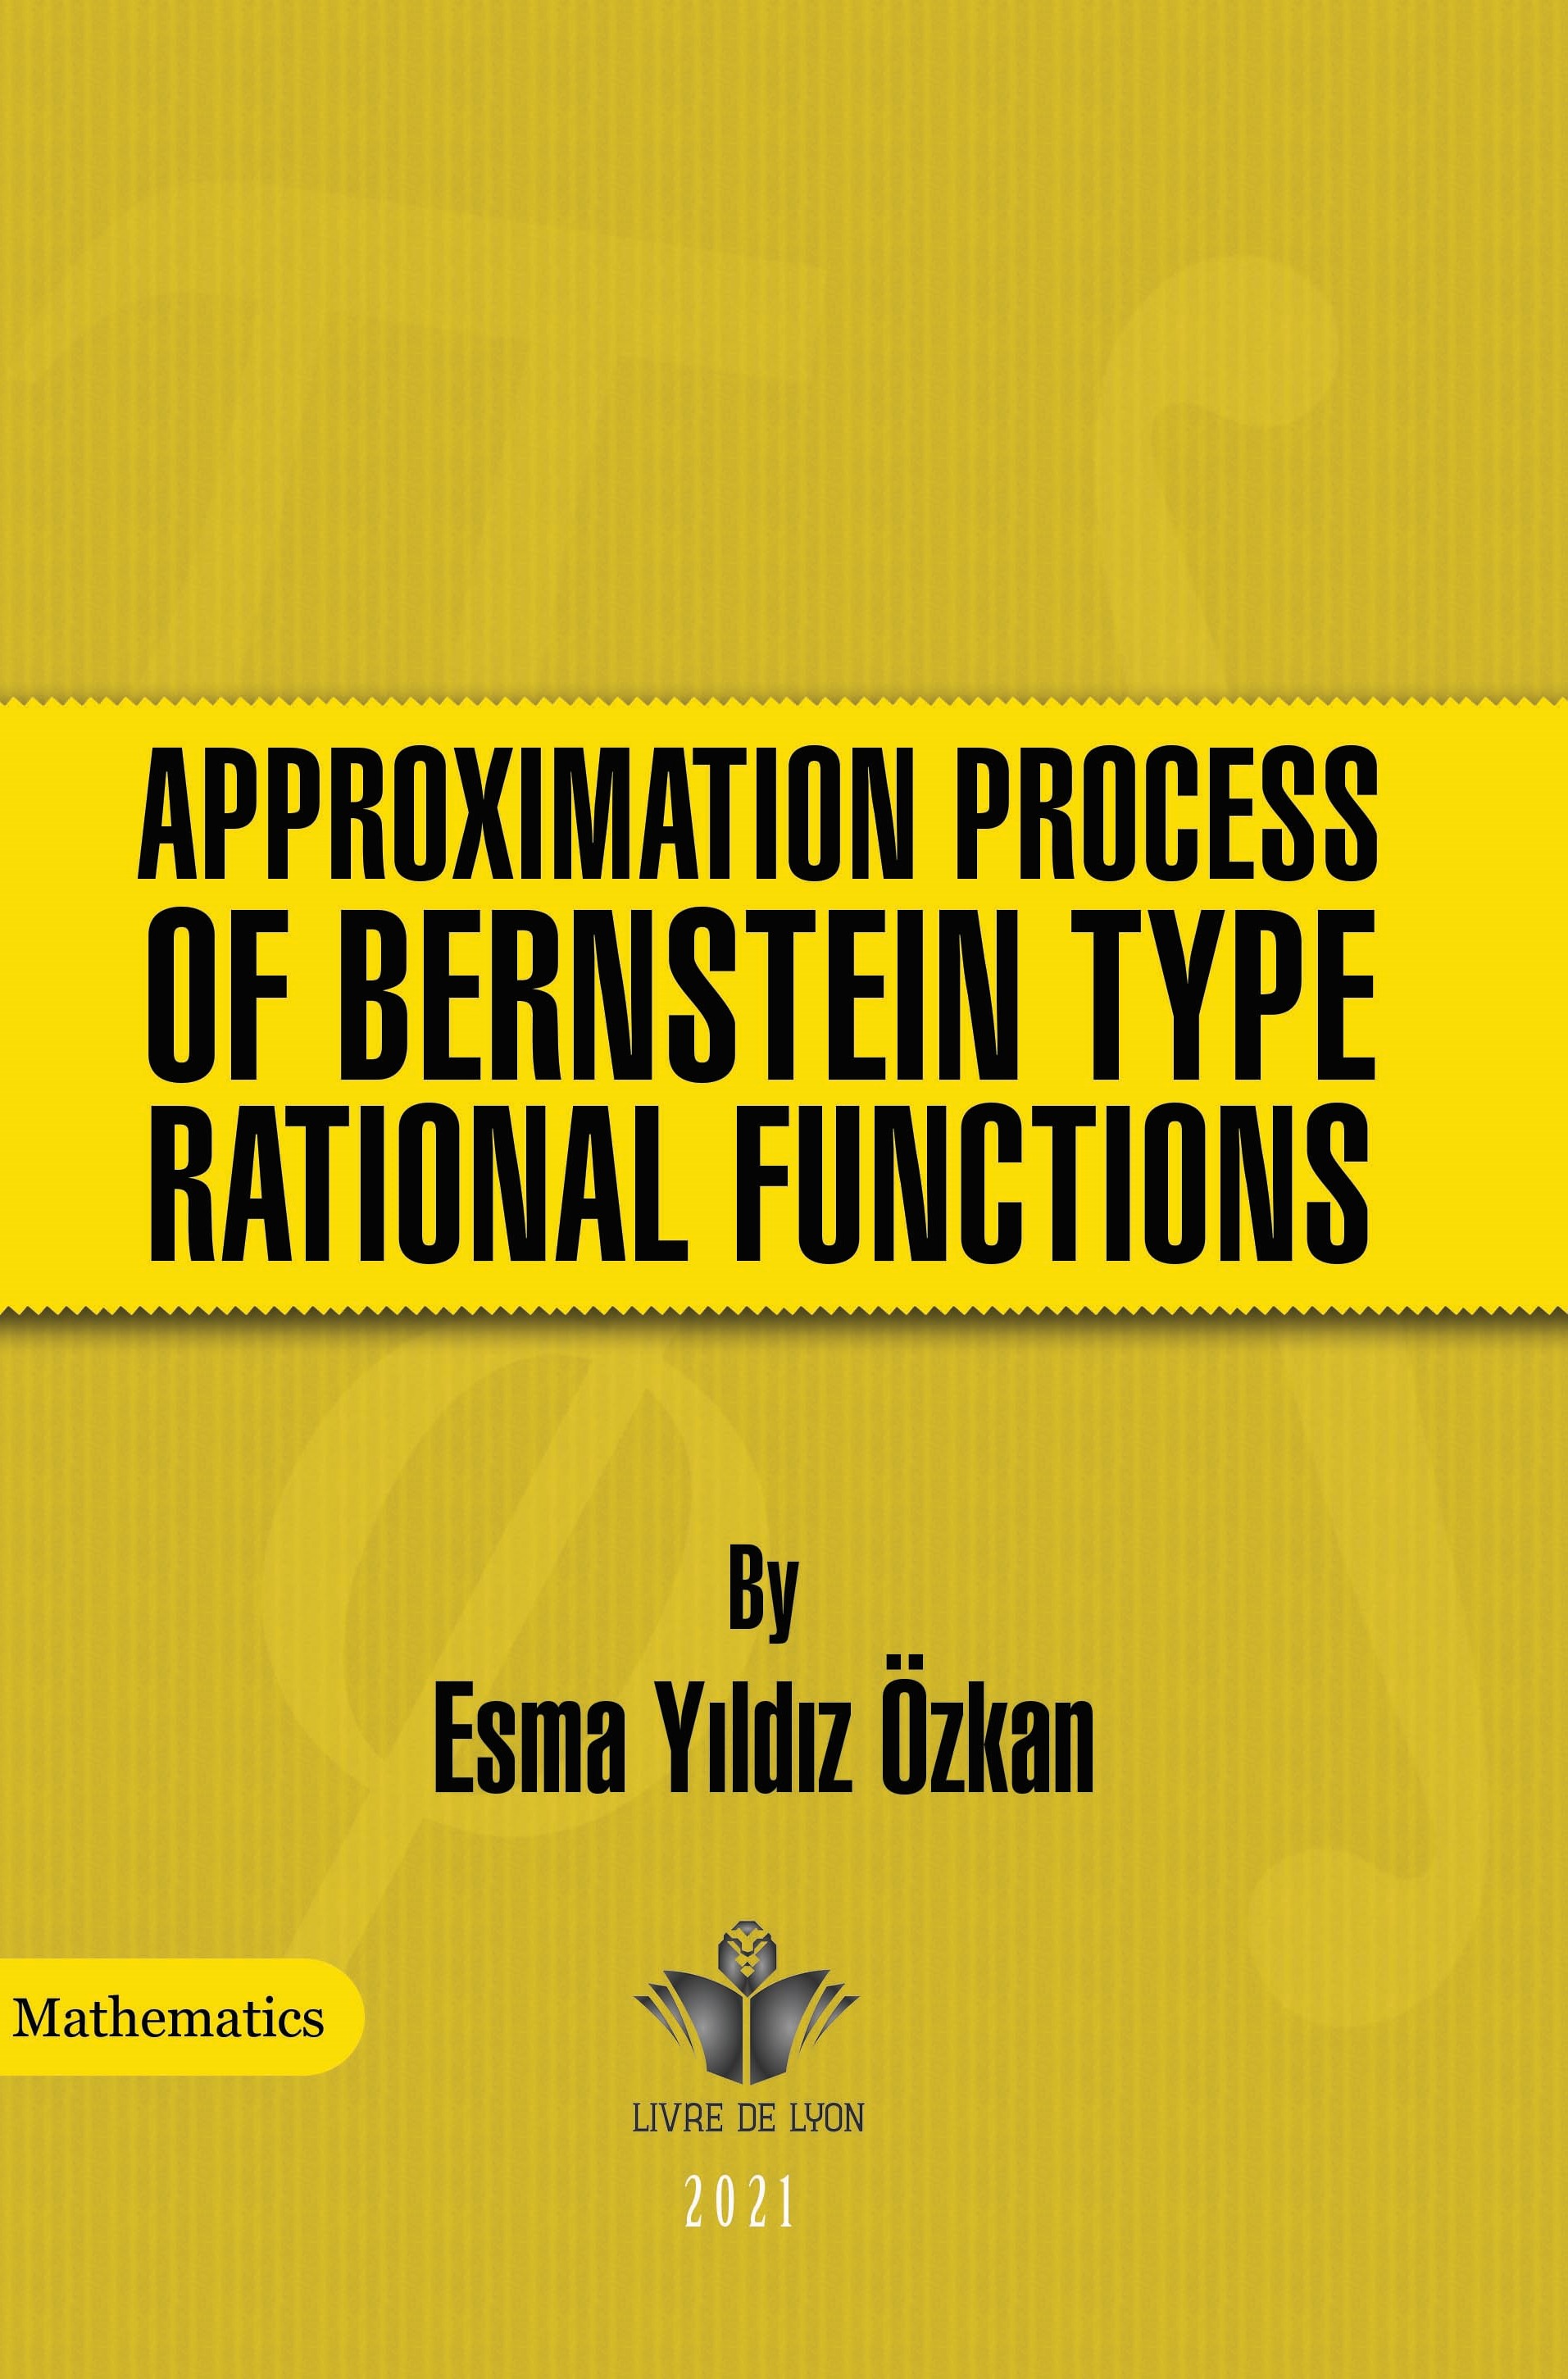 Approximation Process of Bernstein Type Rational Functions